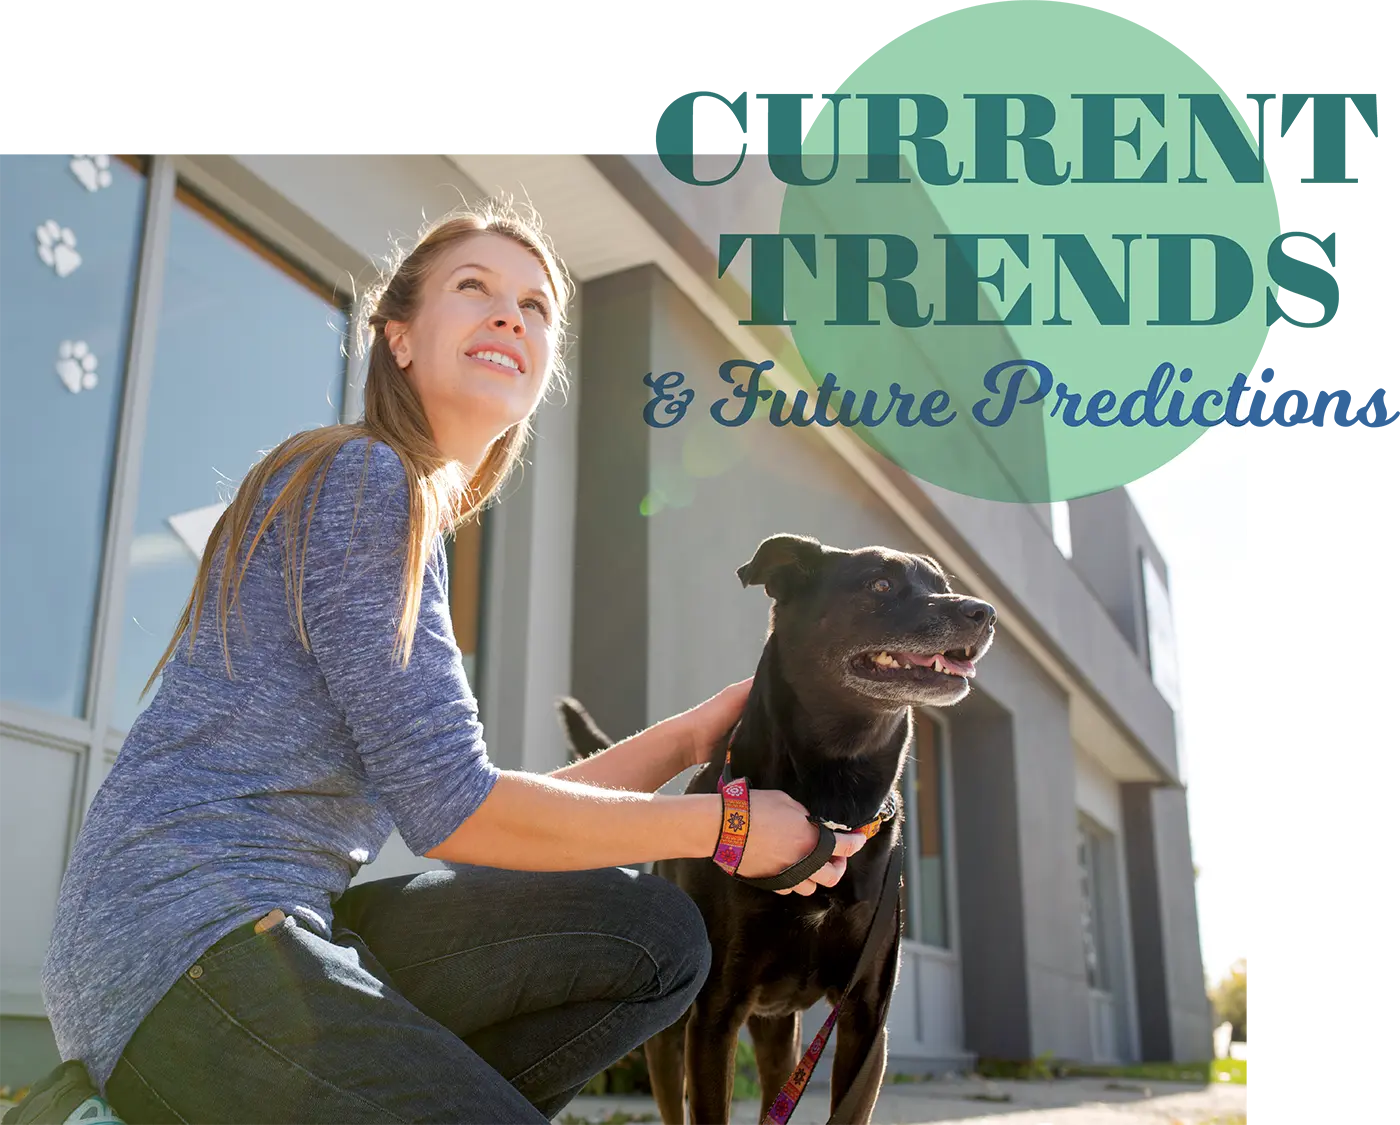 Current Trends and Future Predictions title with woman smiling and black dog